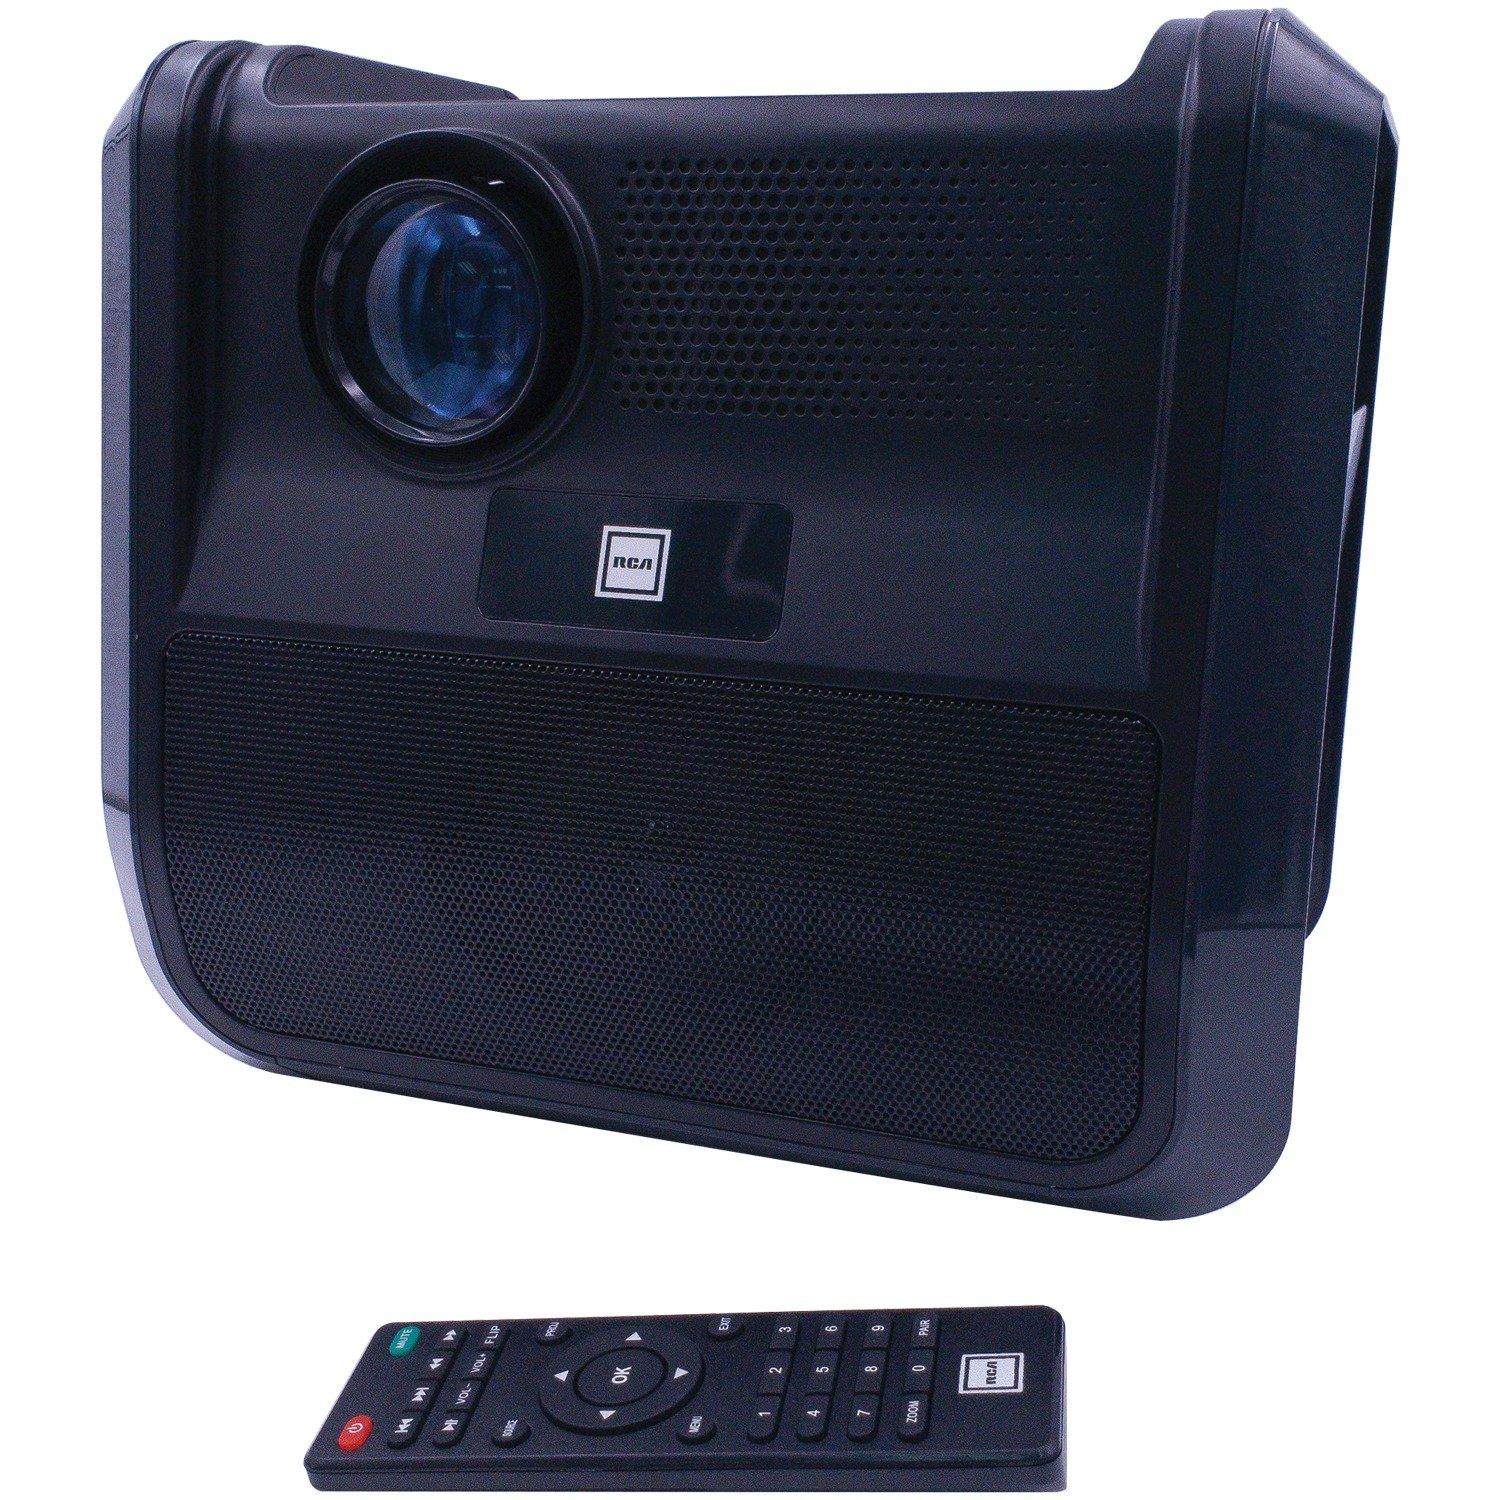 RCA Portable Home Theater Projector Entertainment System with Built-in